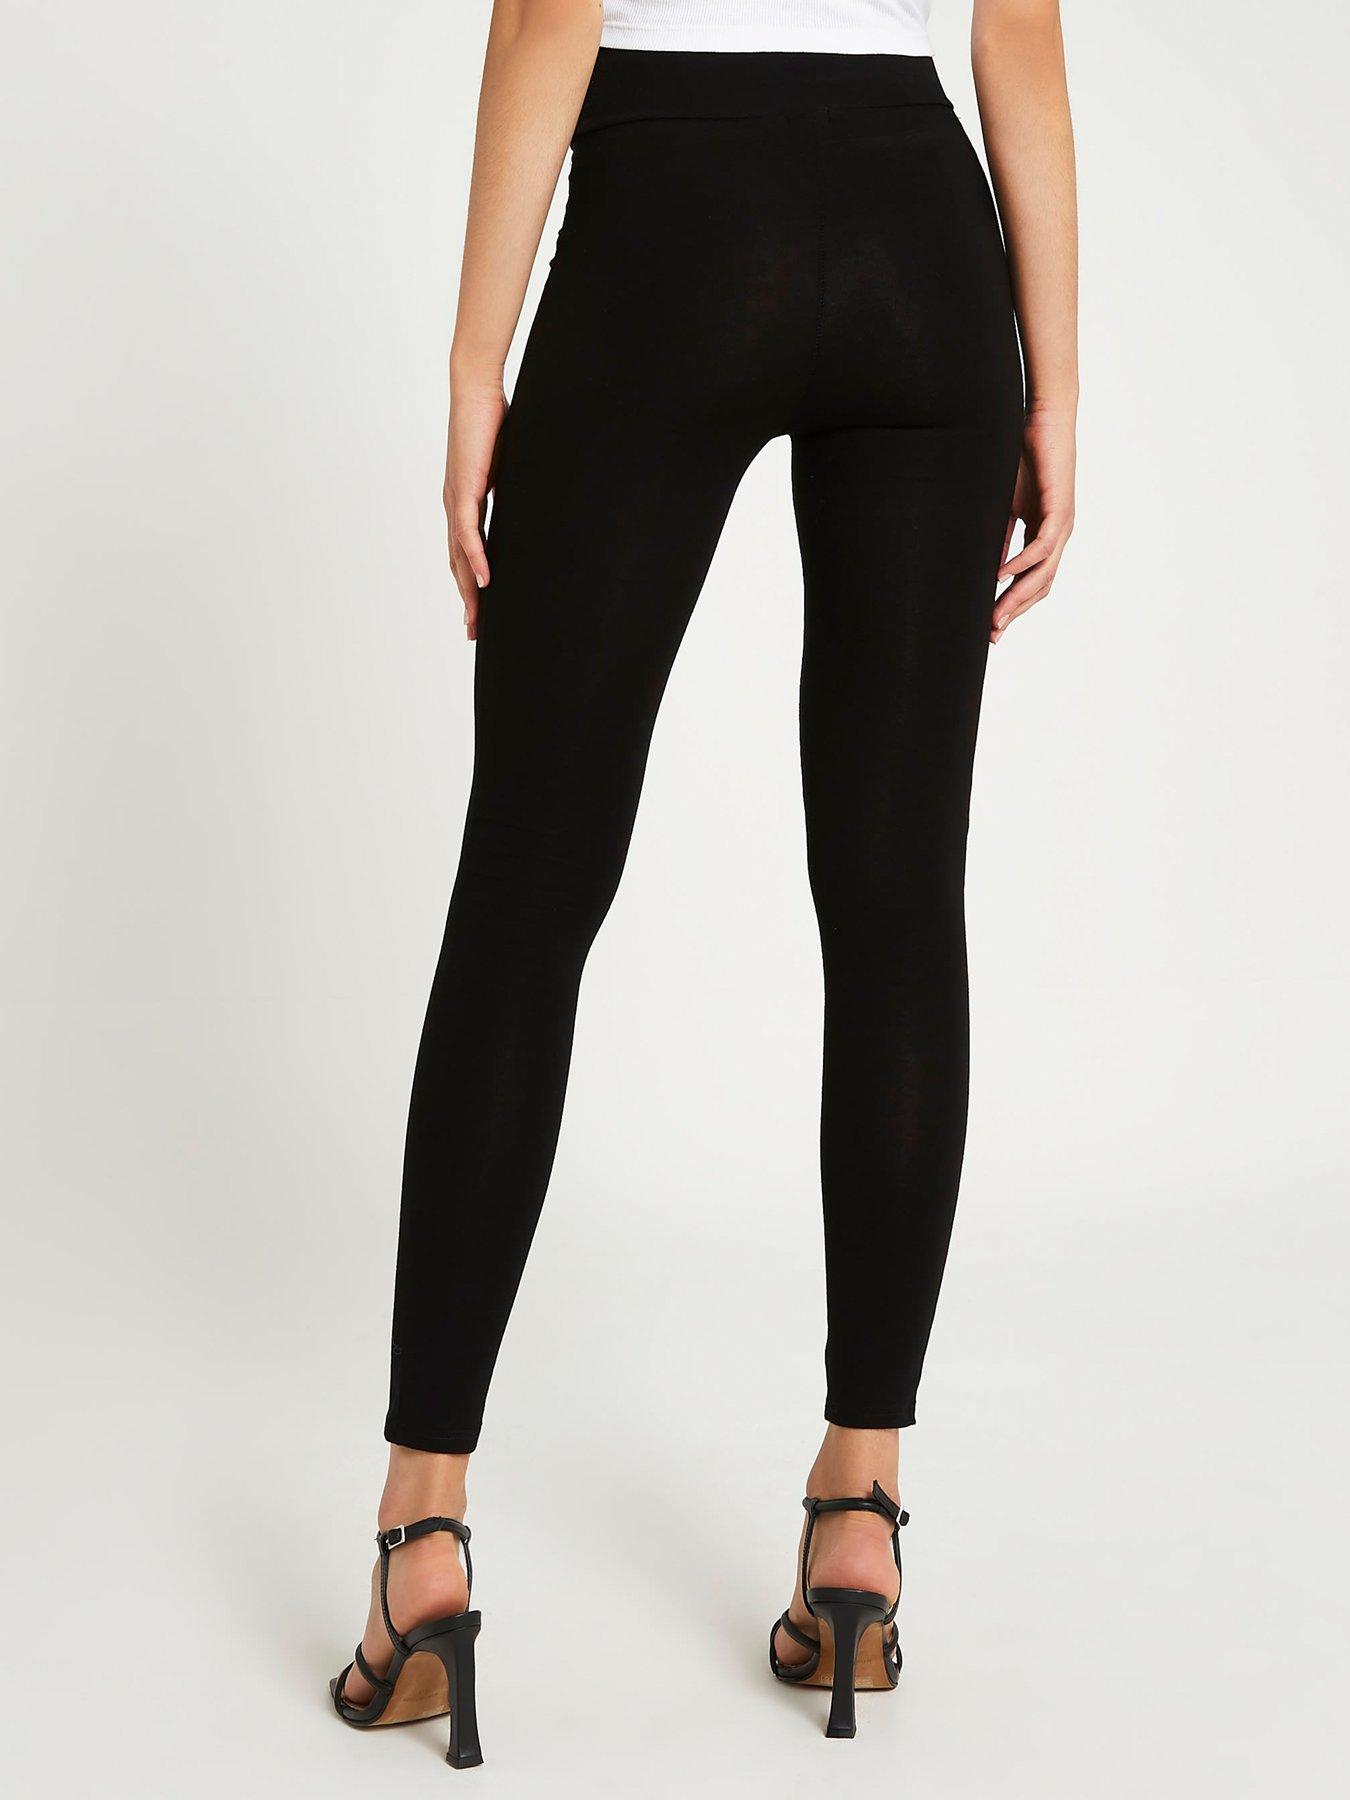 Topshop Petite ribbed legging with front label in black